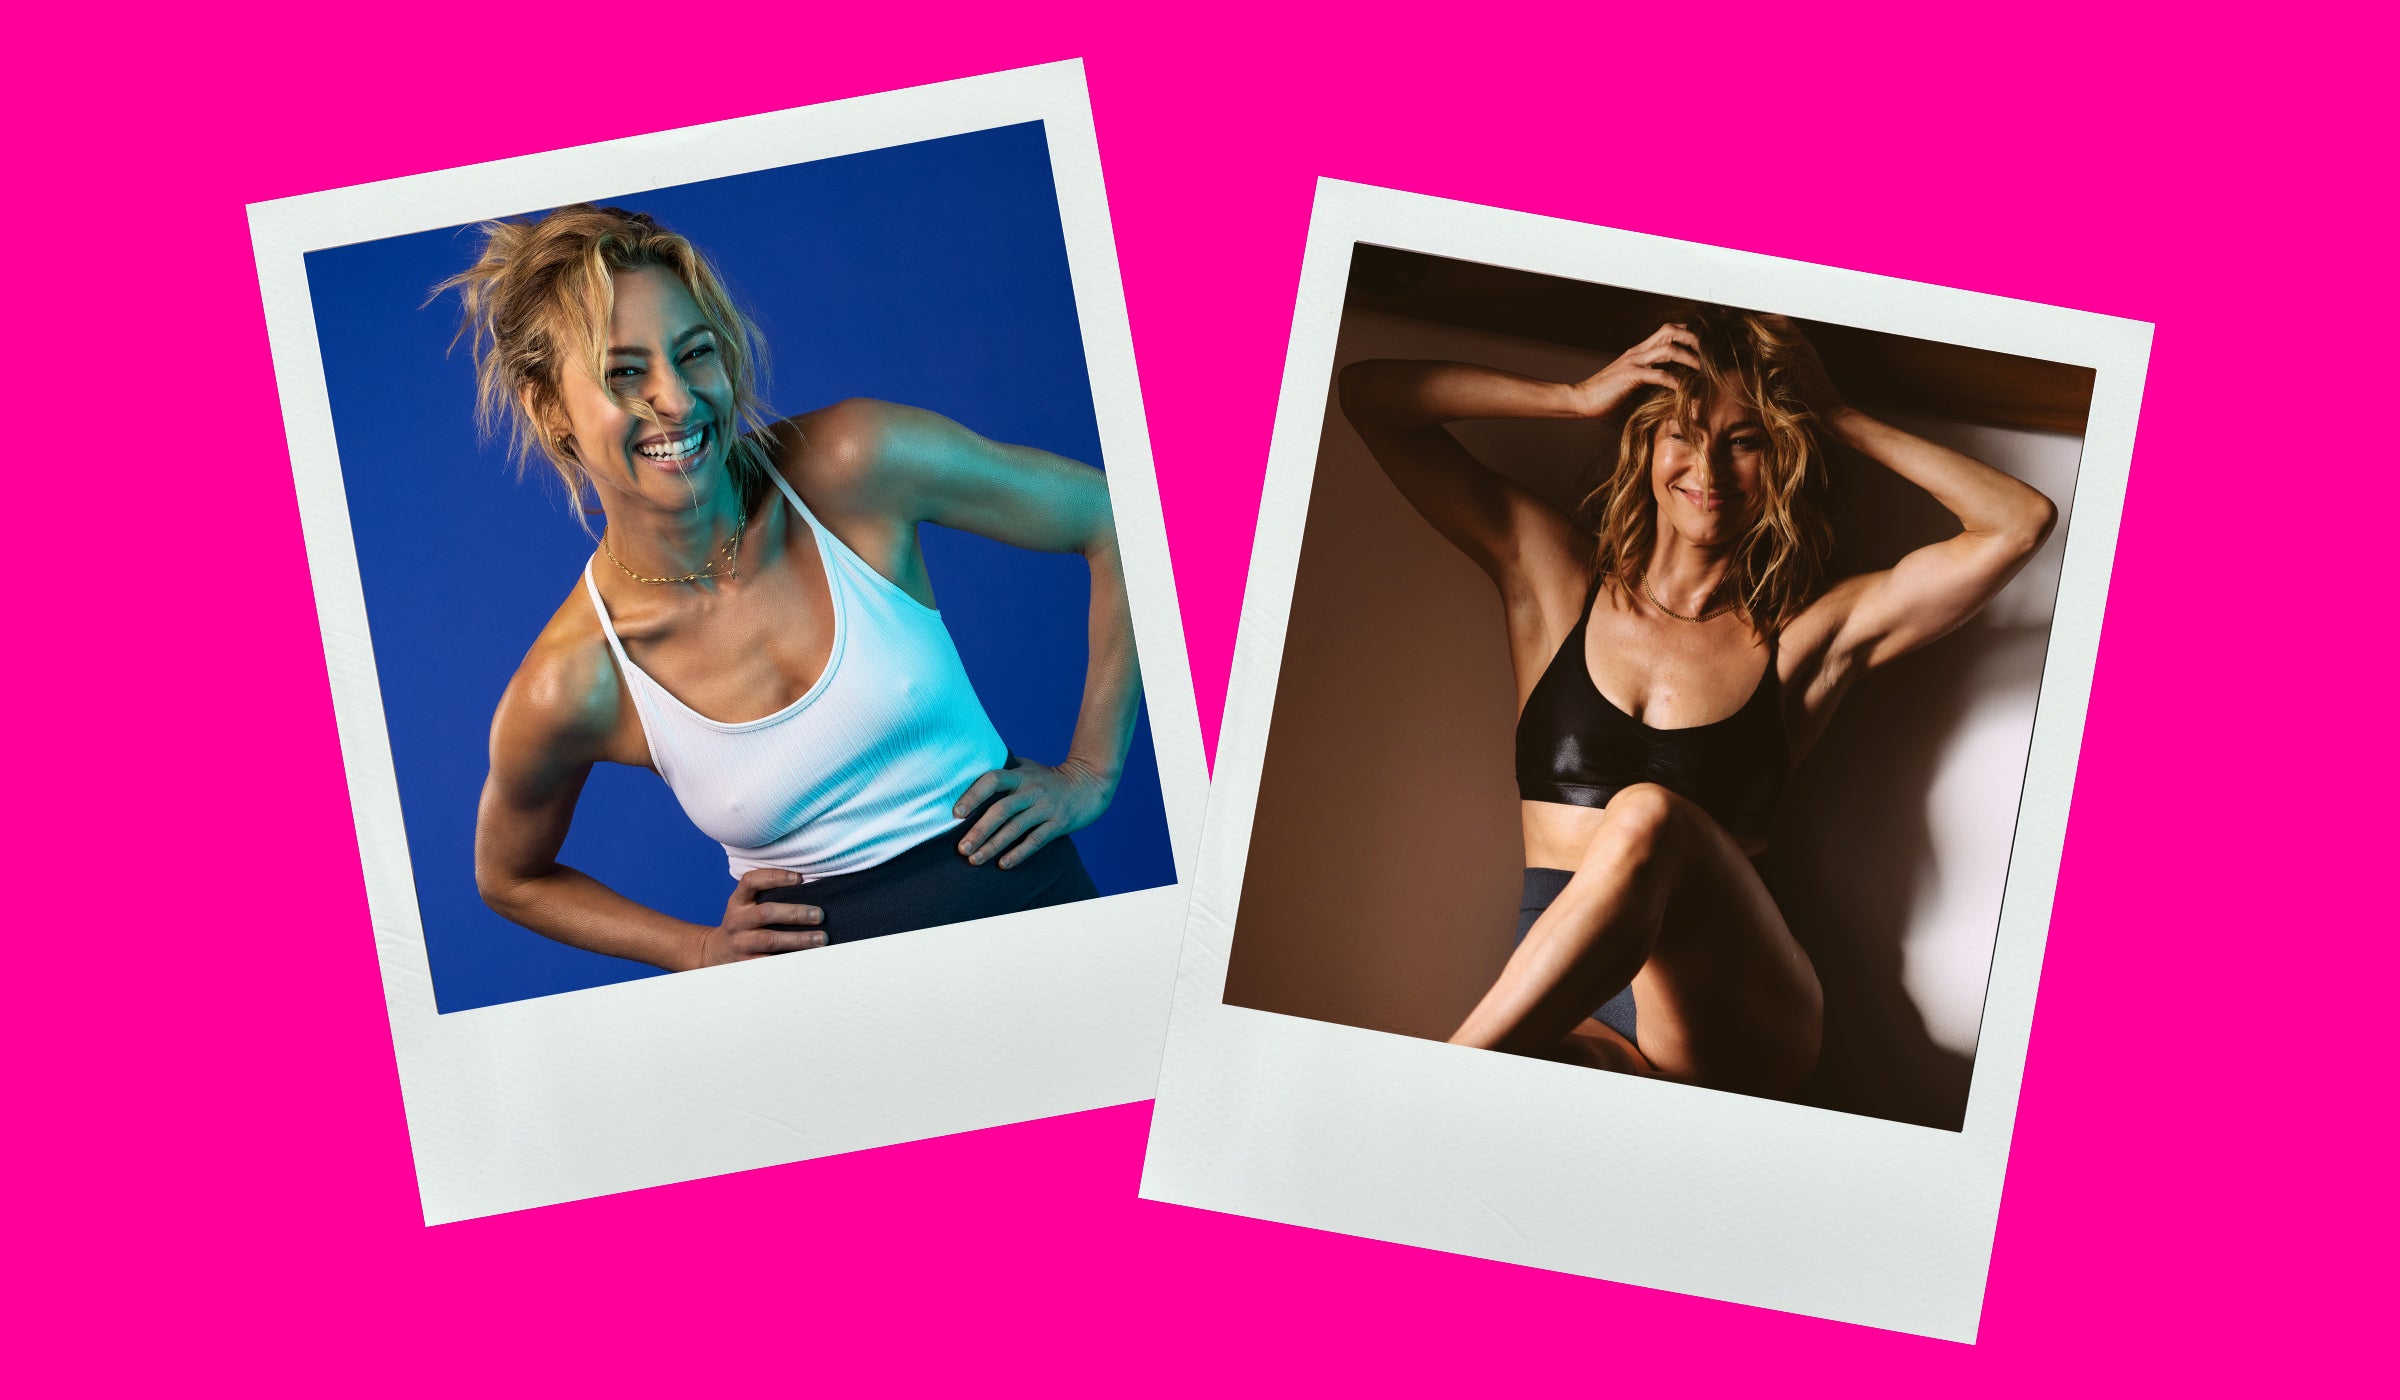 Two polaroid images of fitness trainer Marnie Alton posing in athletic wear